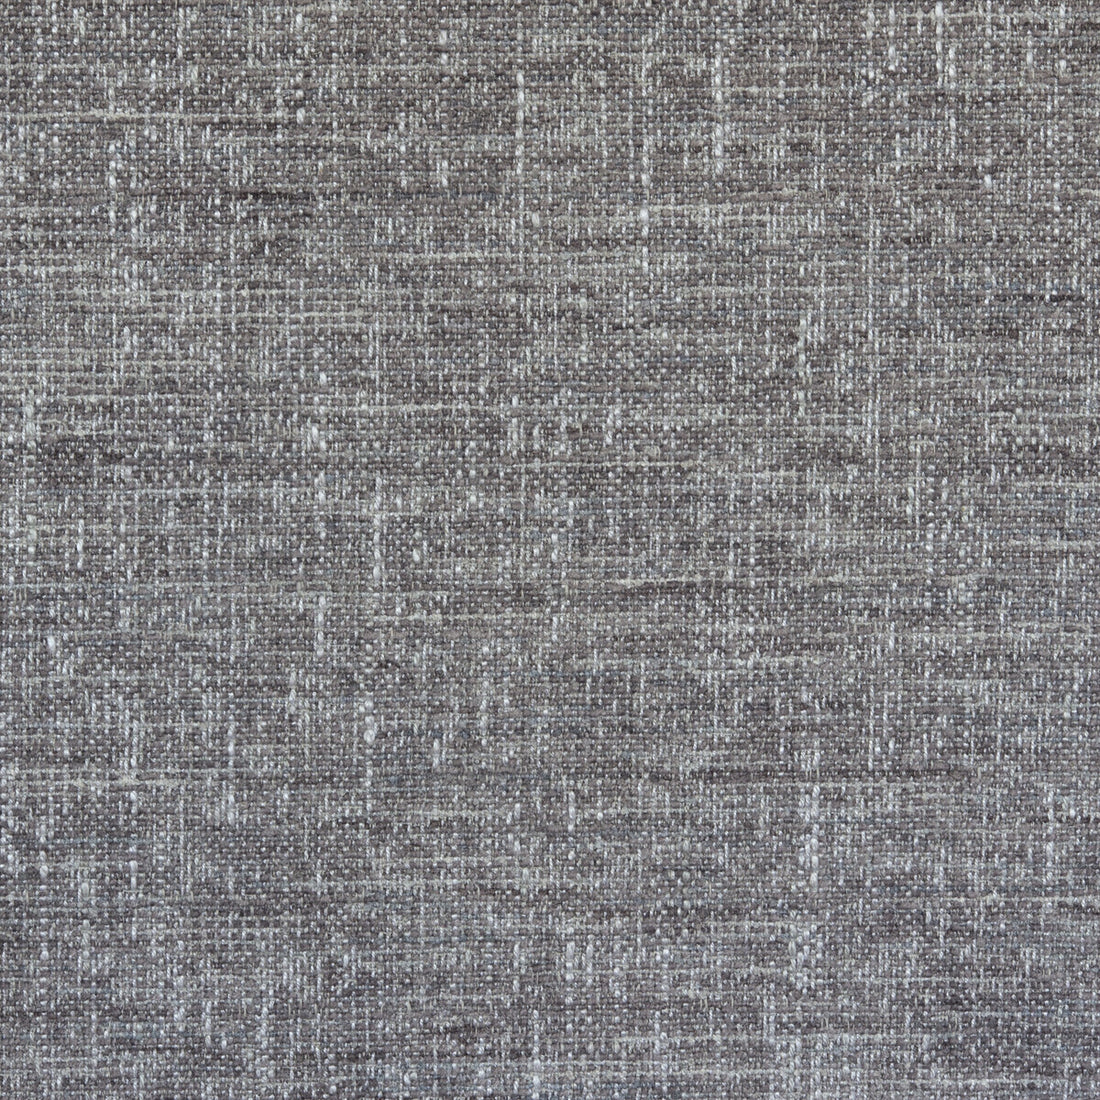 Kravet Couture fabric in 36648-1021 color - pattern 36648.1021.0 - by Kravet Couture in the Mabley Handler collection